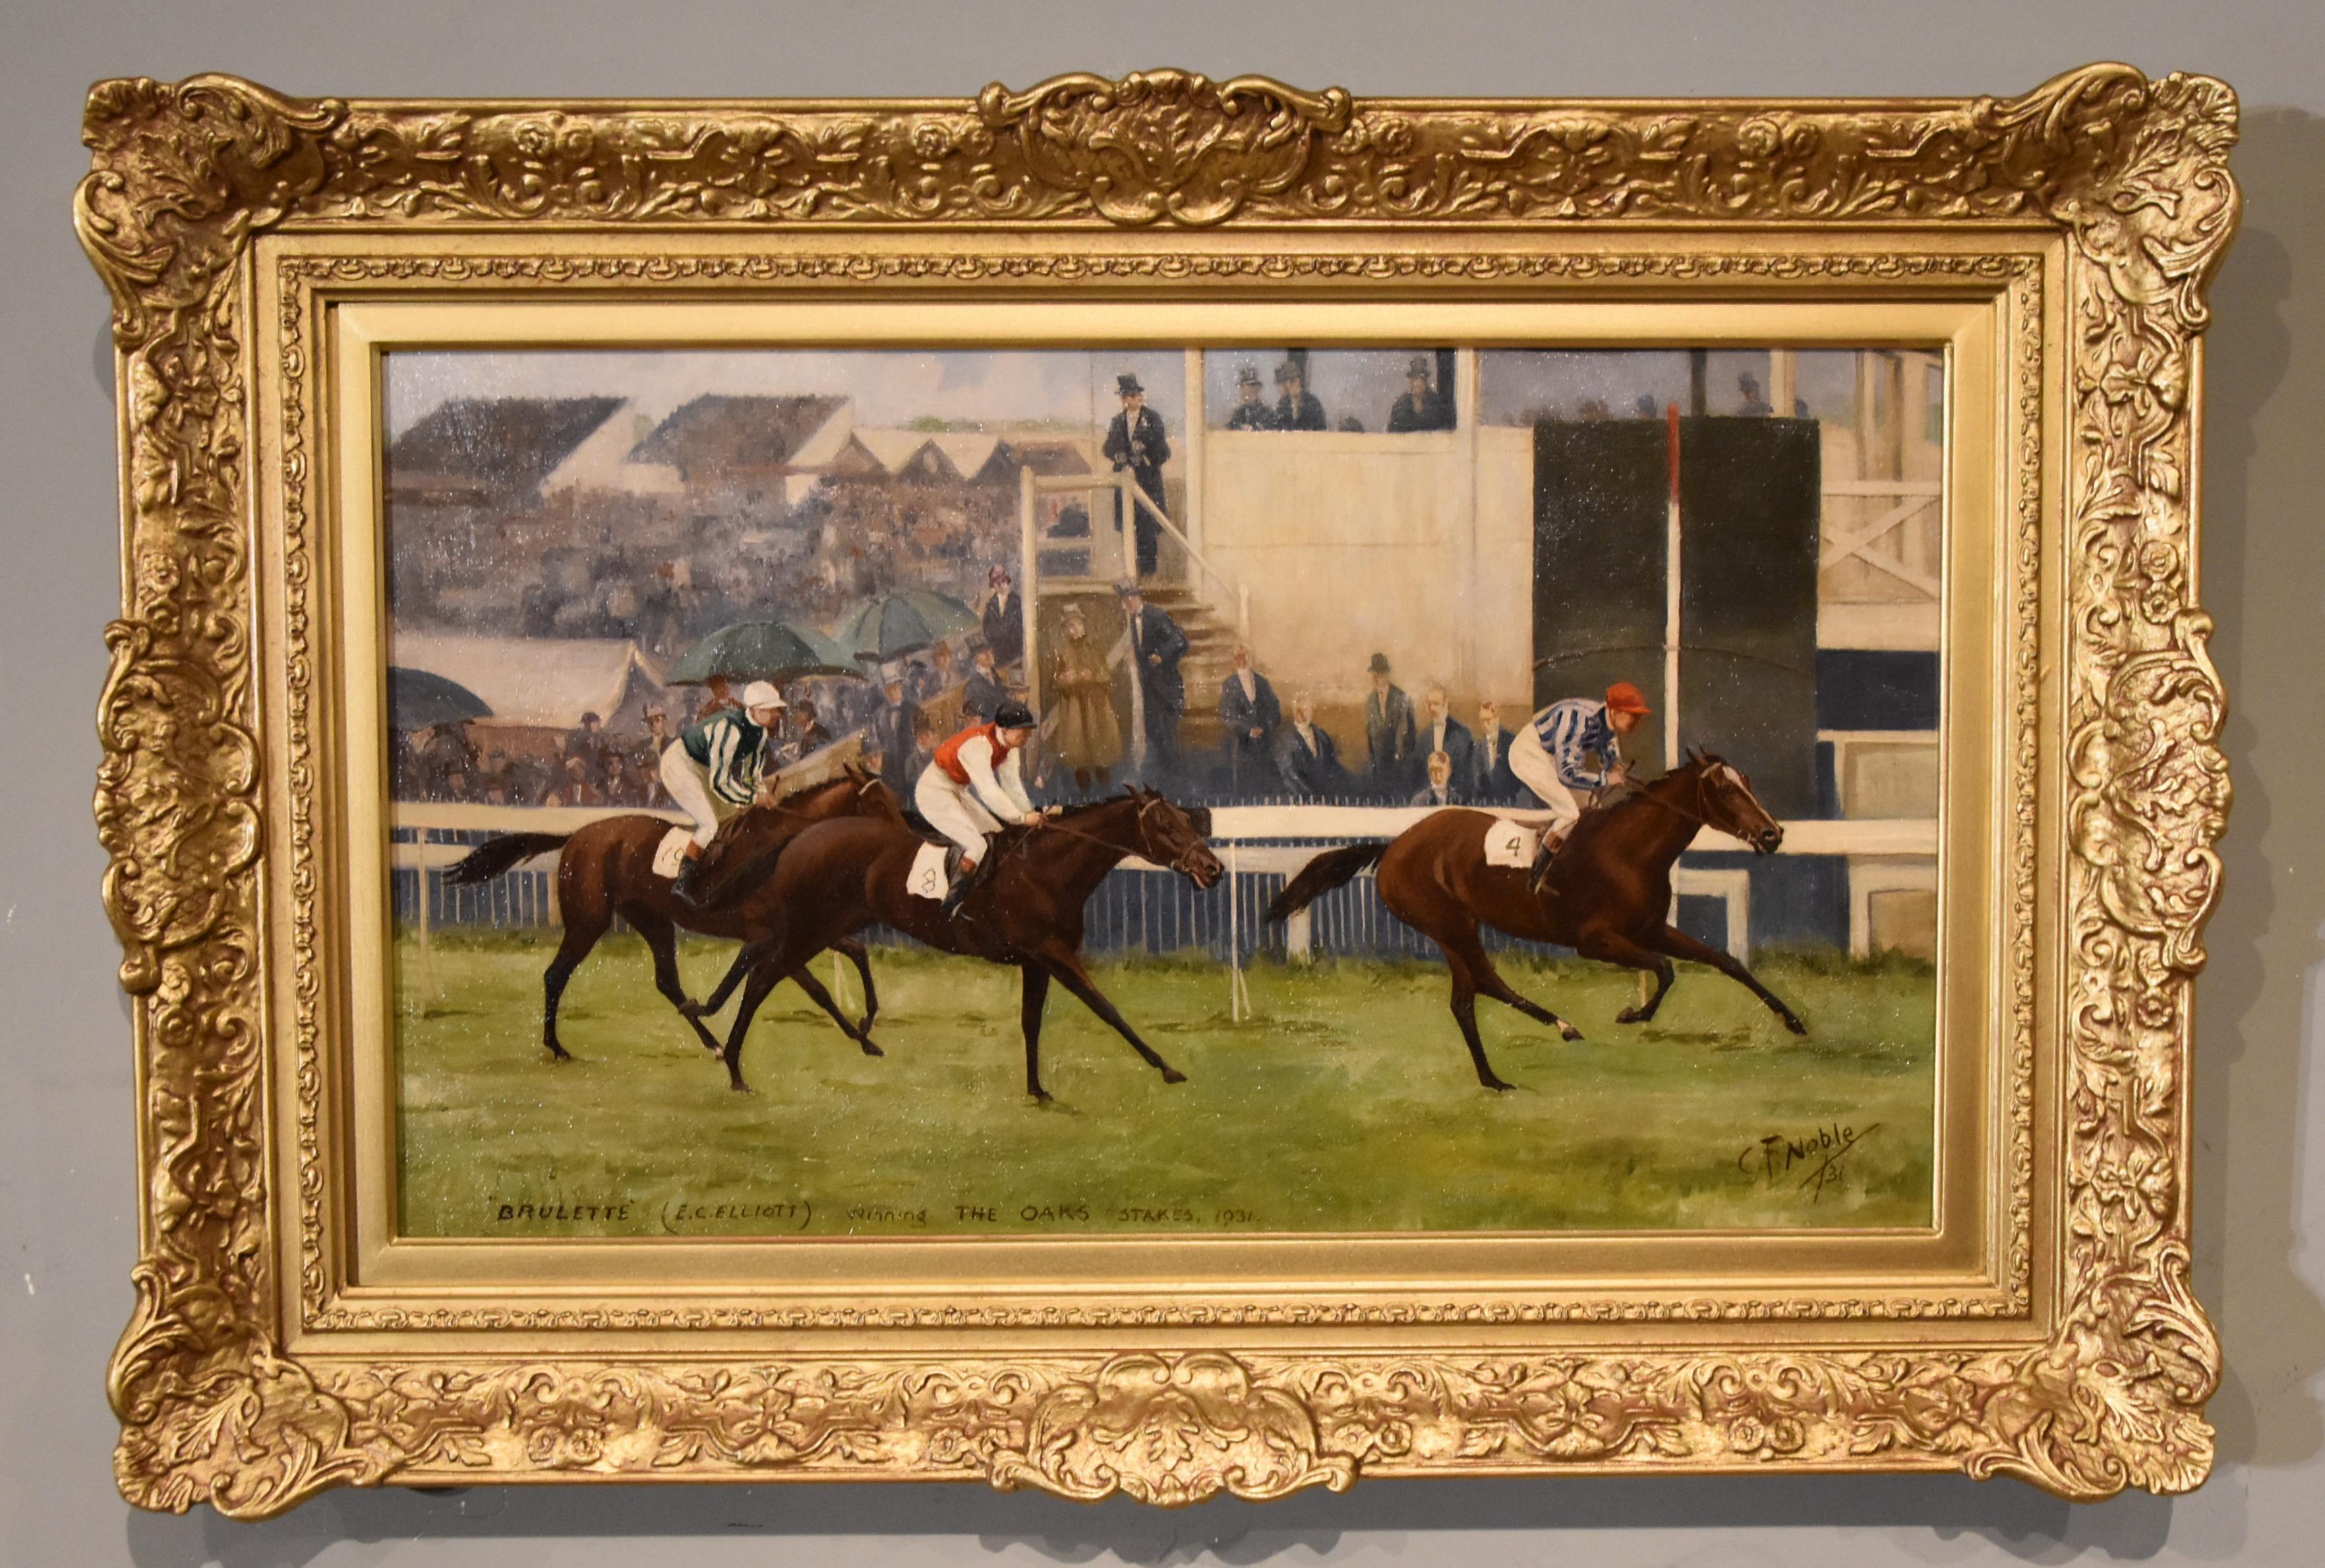 Oil Painting by Charles Frederick Noble  "Brulette (E.C.Elliot) winning the 1931 Oak Stakes"" 1920 - 1931 A Hampstead, North London painter of dramatic racing and hunting scenes and horsefairs. Oil on canvas. Signed and dated 1931

Dimensions